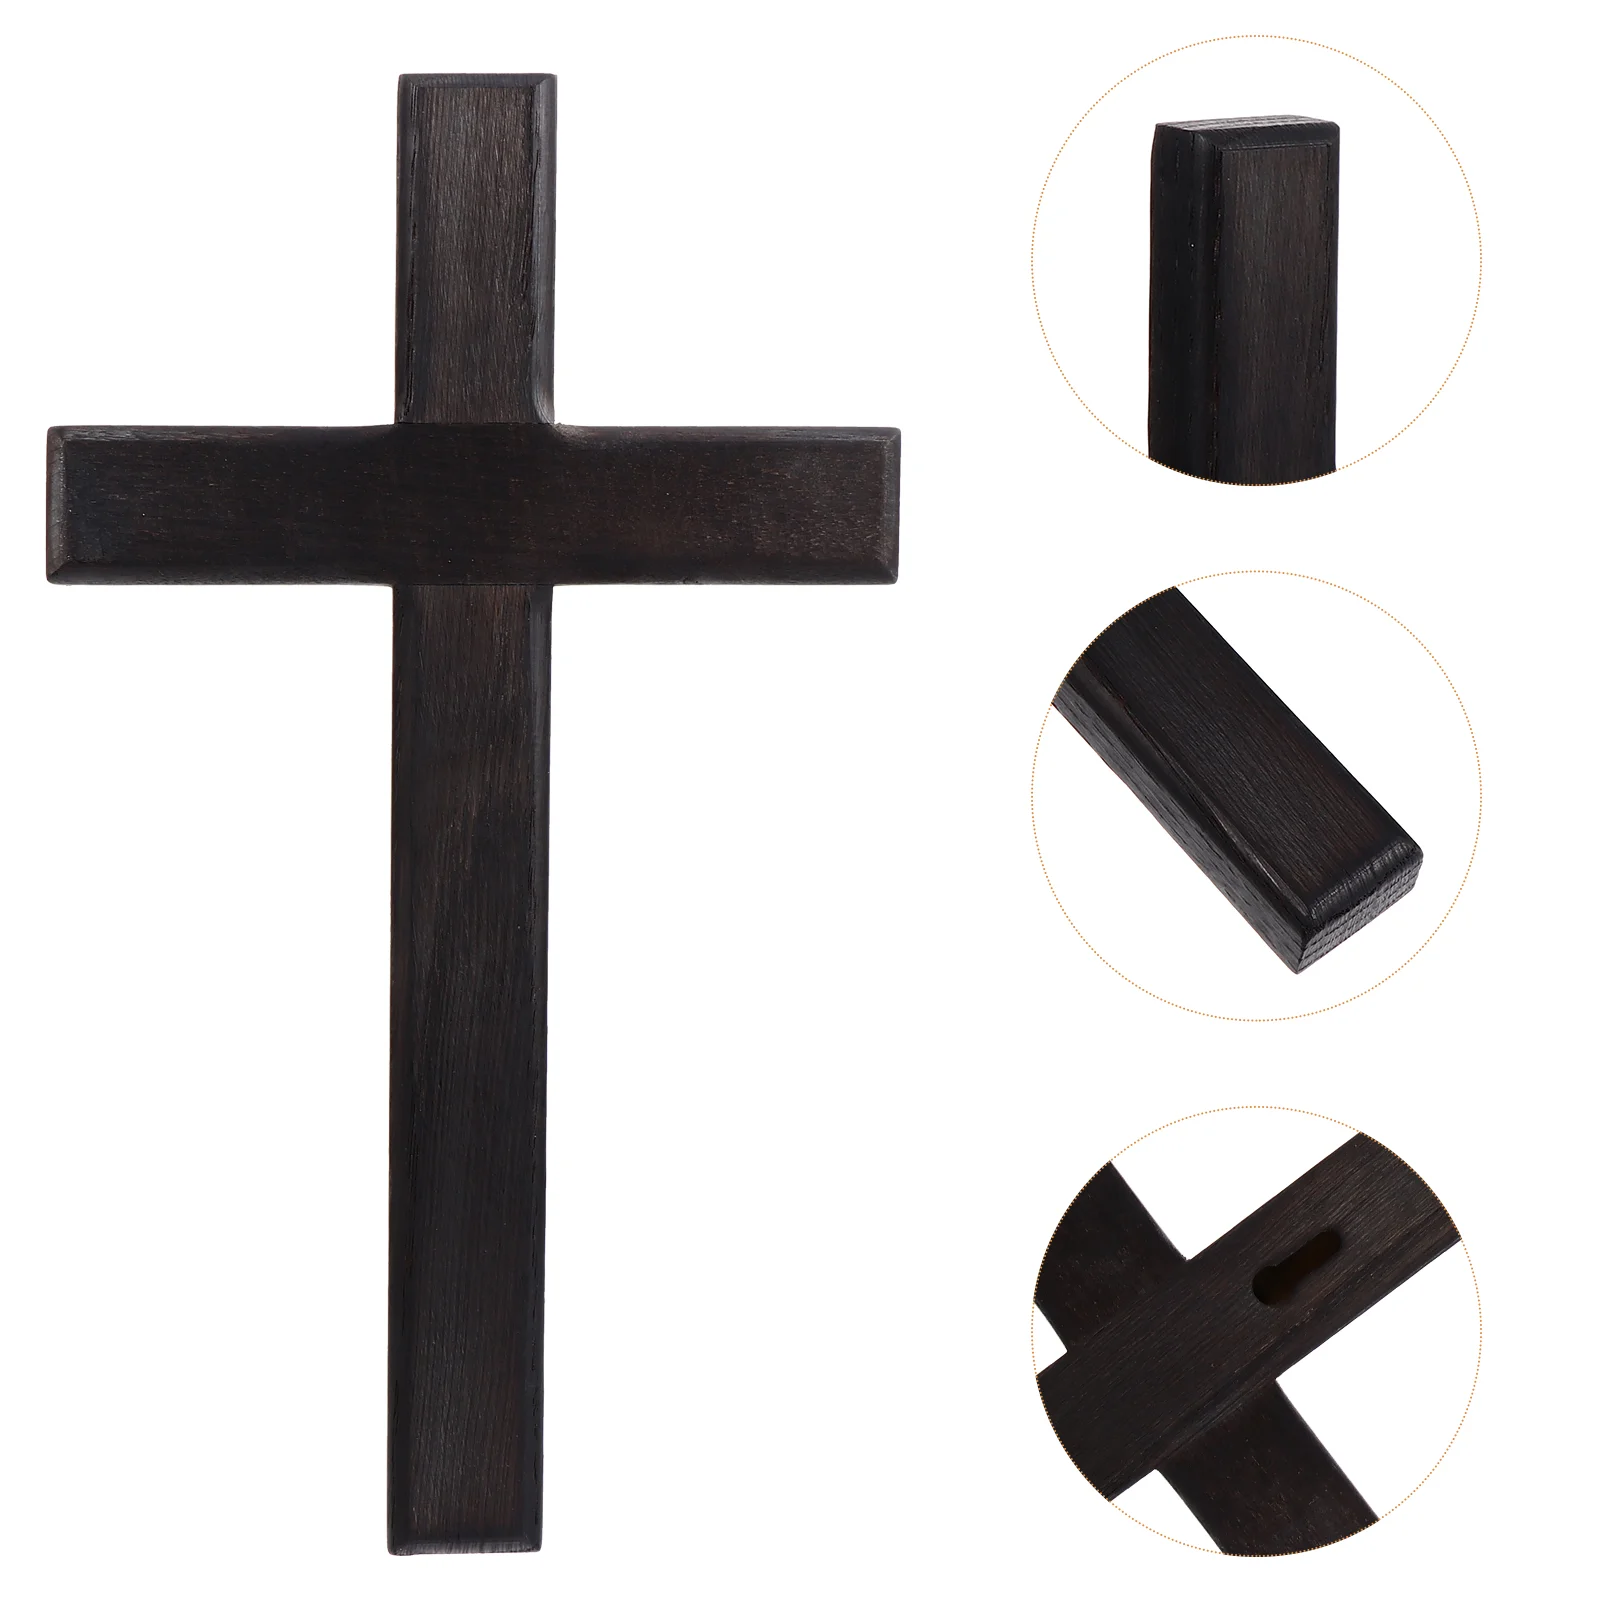 

Wooden Cross Wall Mounted Wood Black Holy Jesus Cross Wall Hanging Catholic Crucifix Crosses for Home